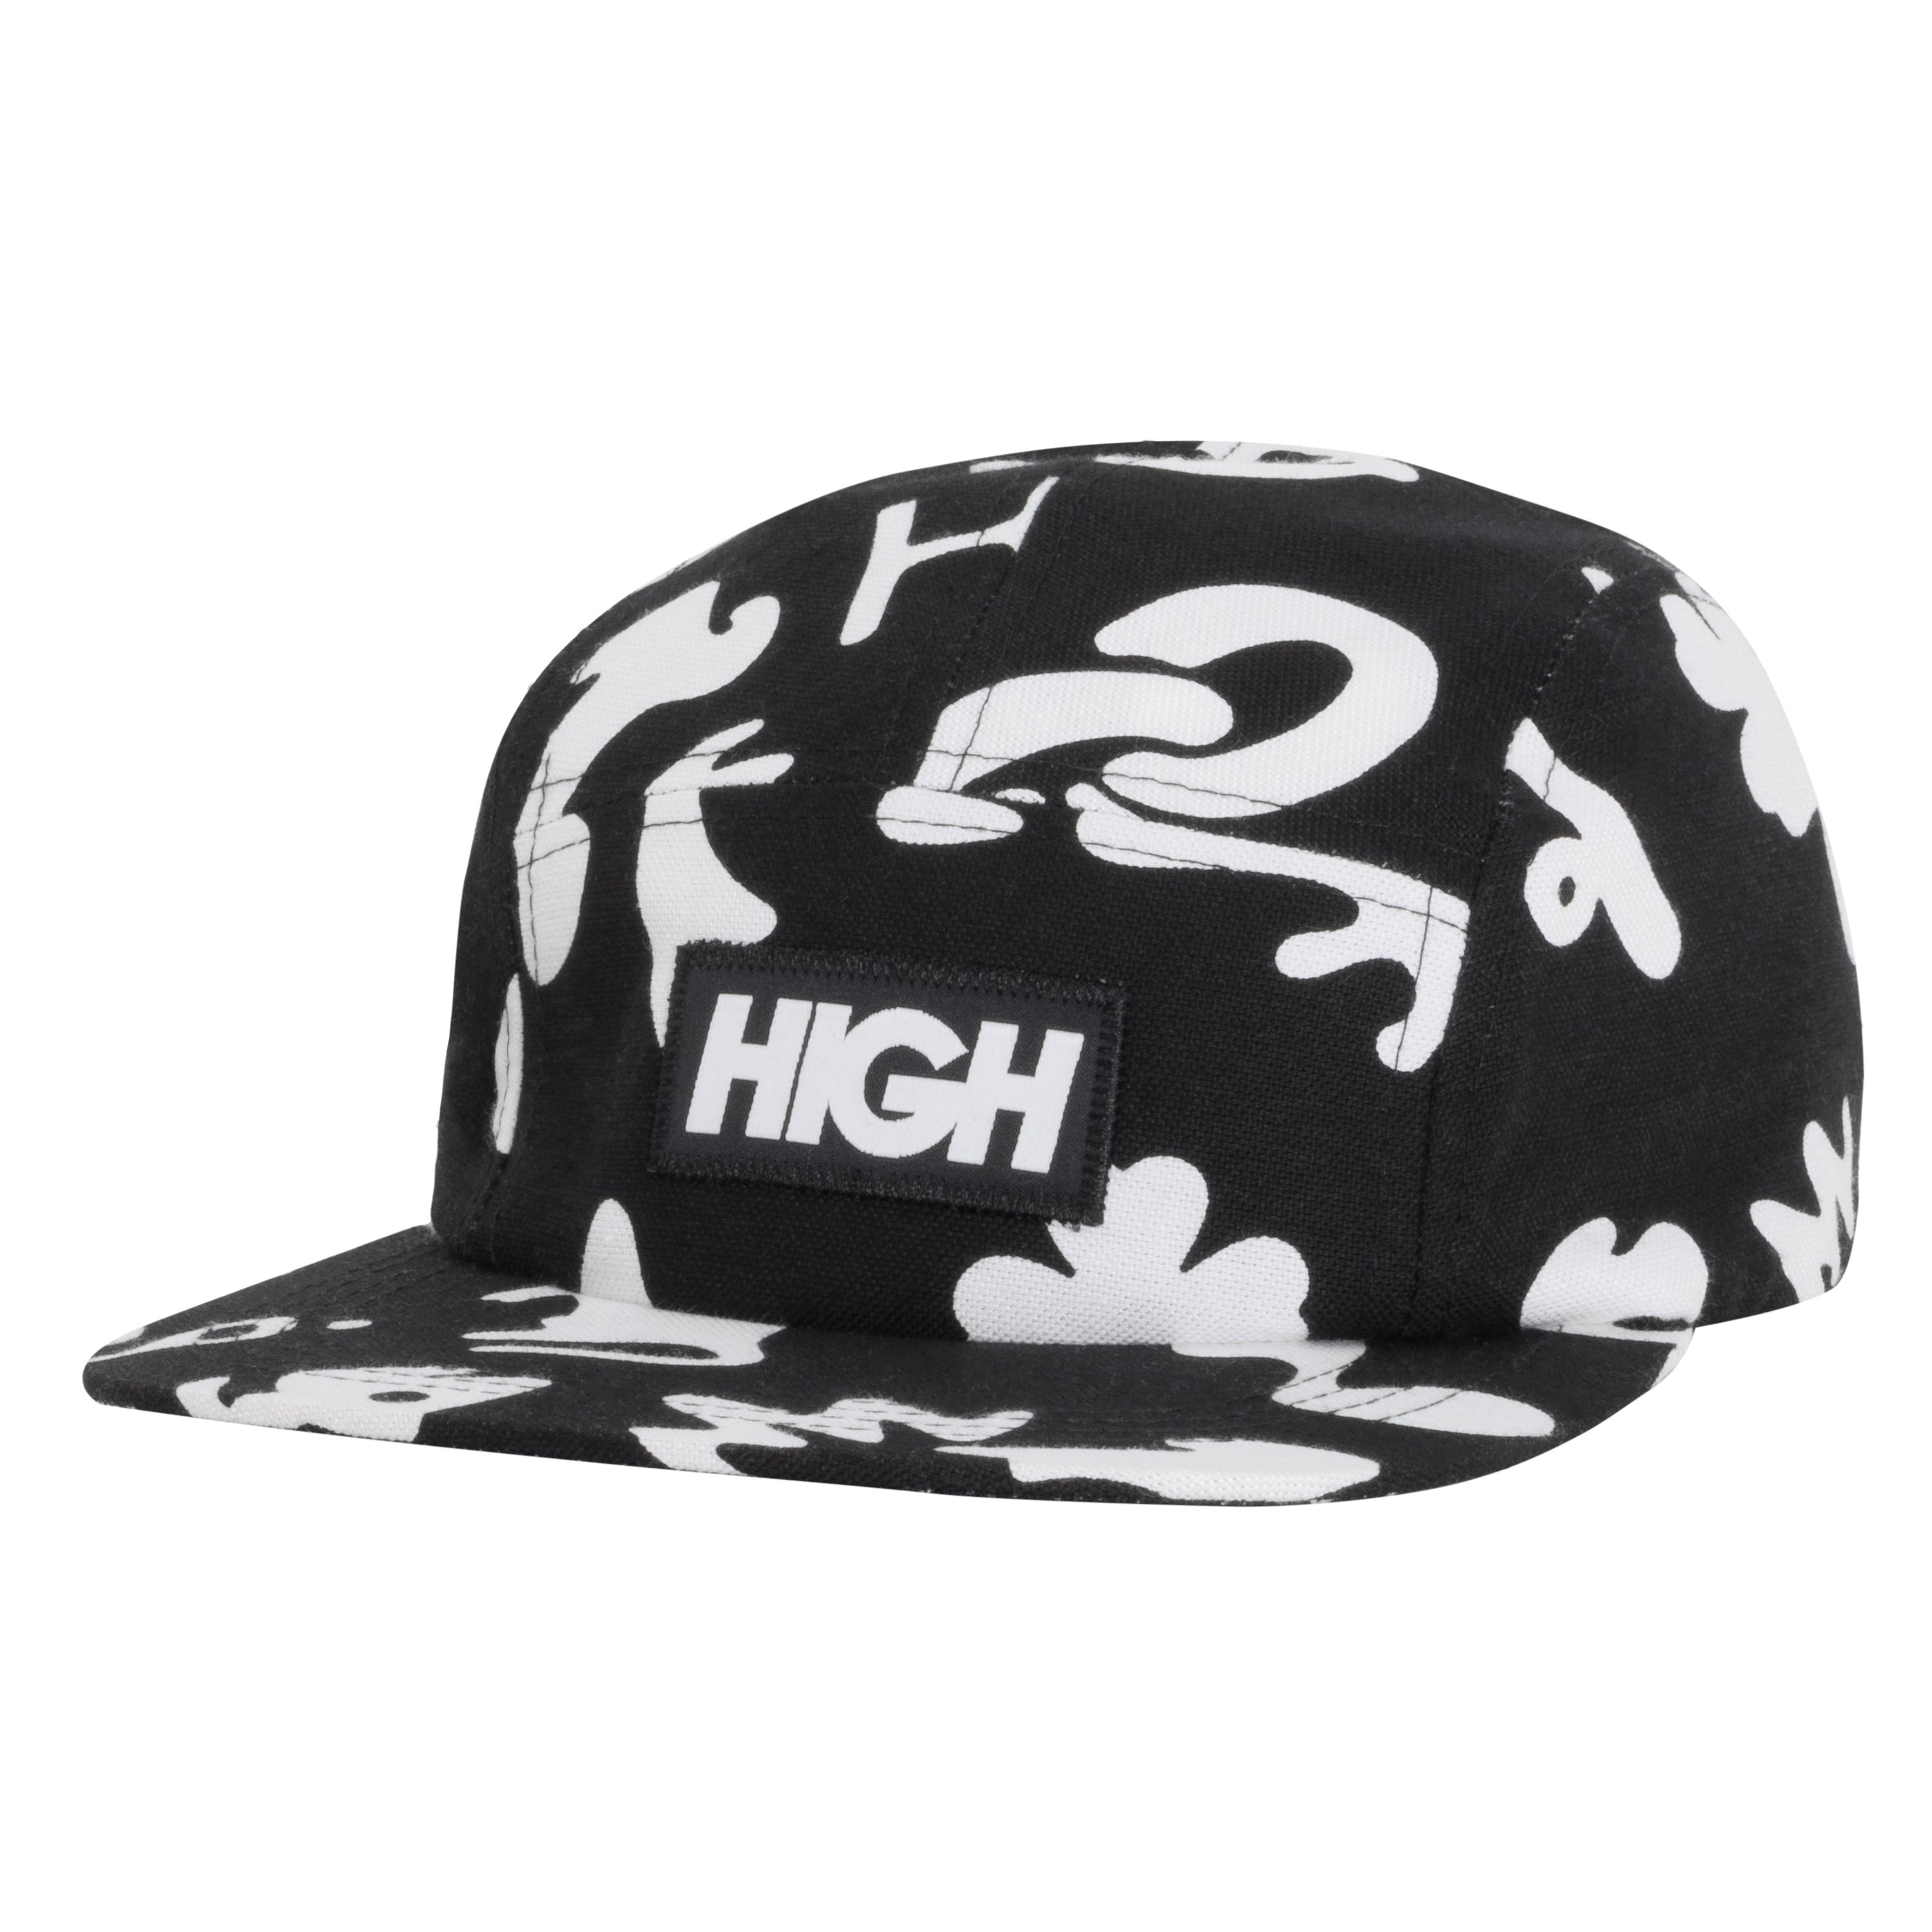 HIGH - 5 Panel Overall "Black" - THE GAME